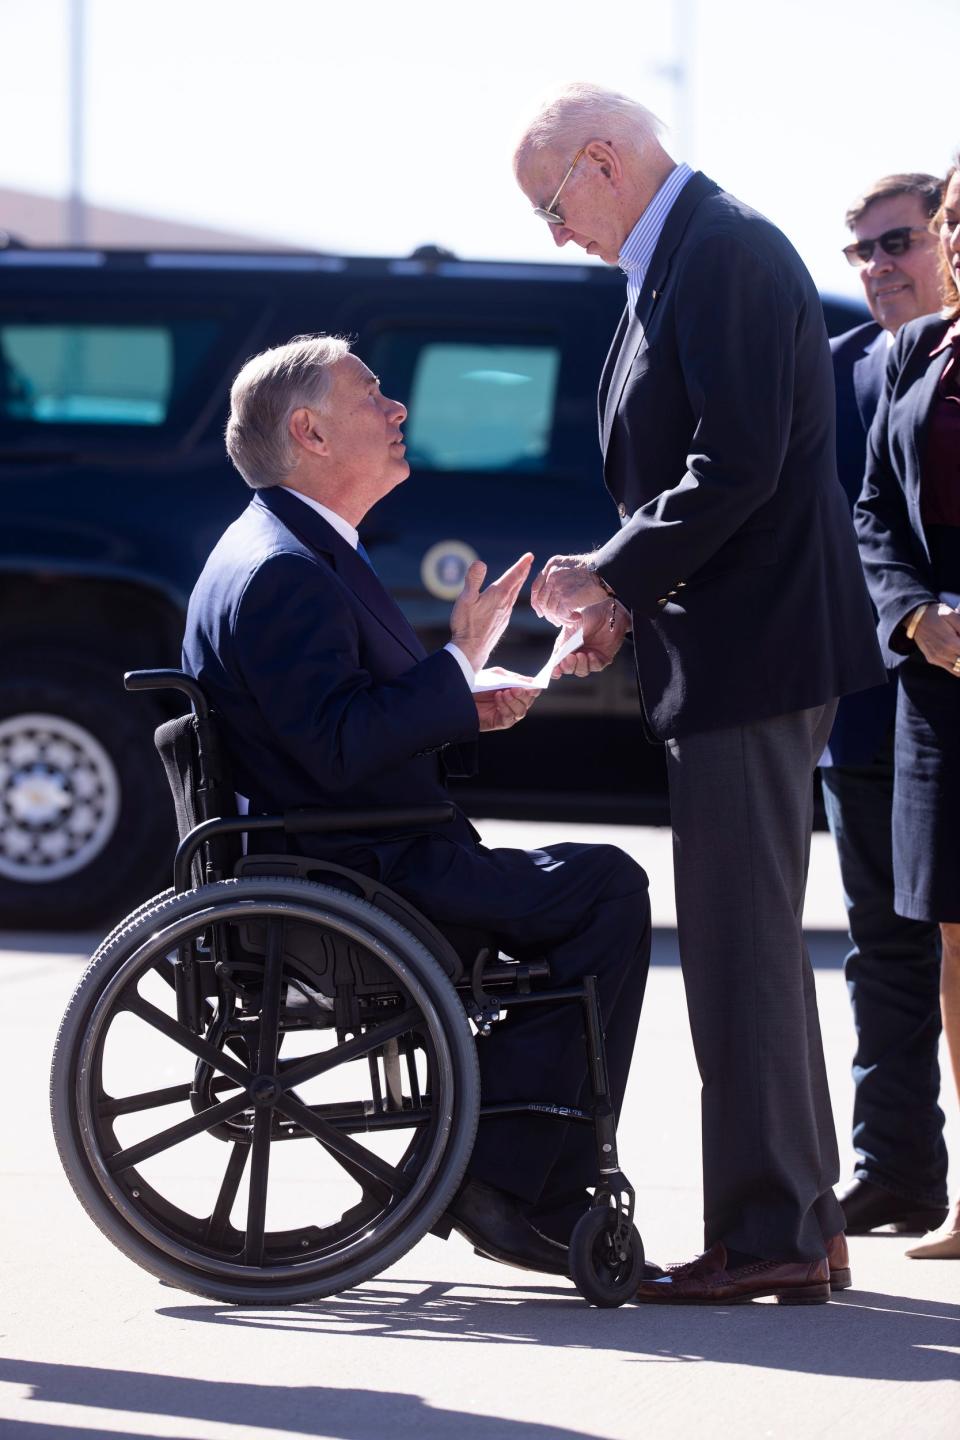 Texas Gov. Abbott hands a letter to President Joe Biden during the president’s arrival in El Paso, Texas on Jan. 8, 2022. The president visited the border city prior to heading the to North American Summit in Mexico City. 